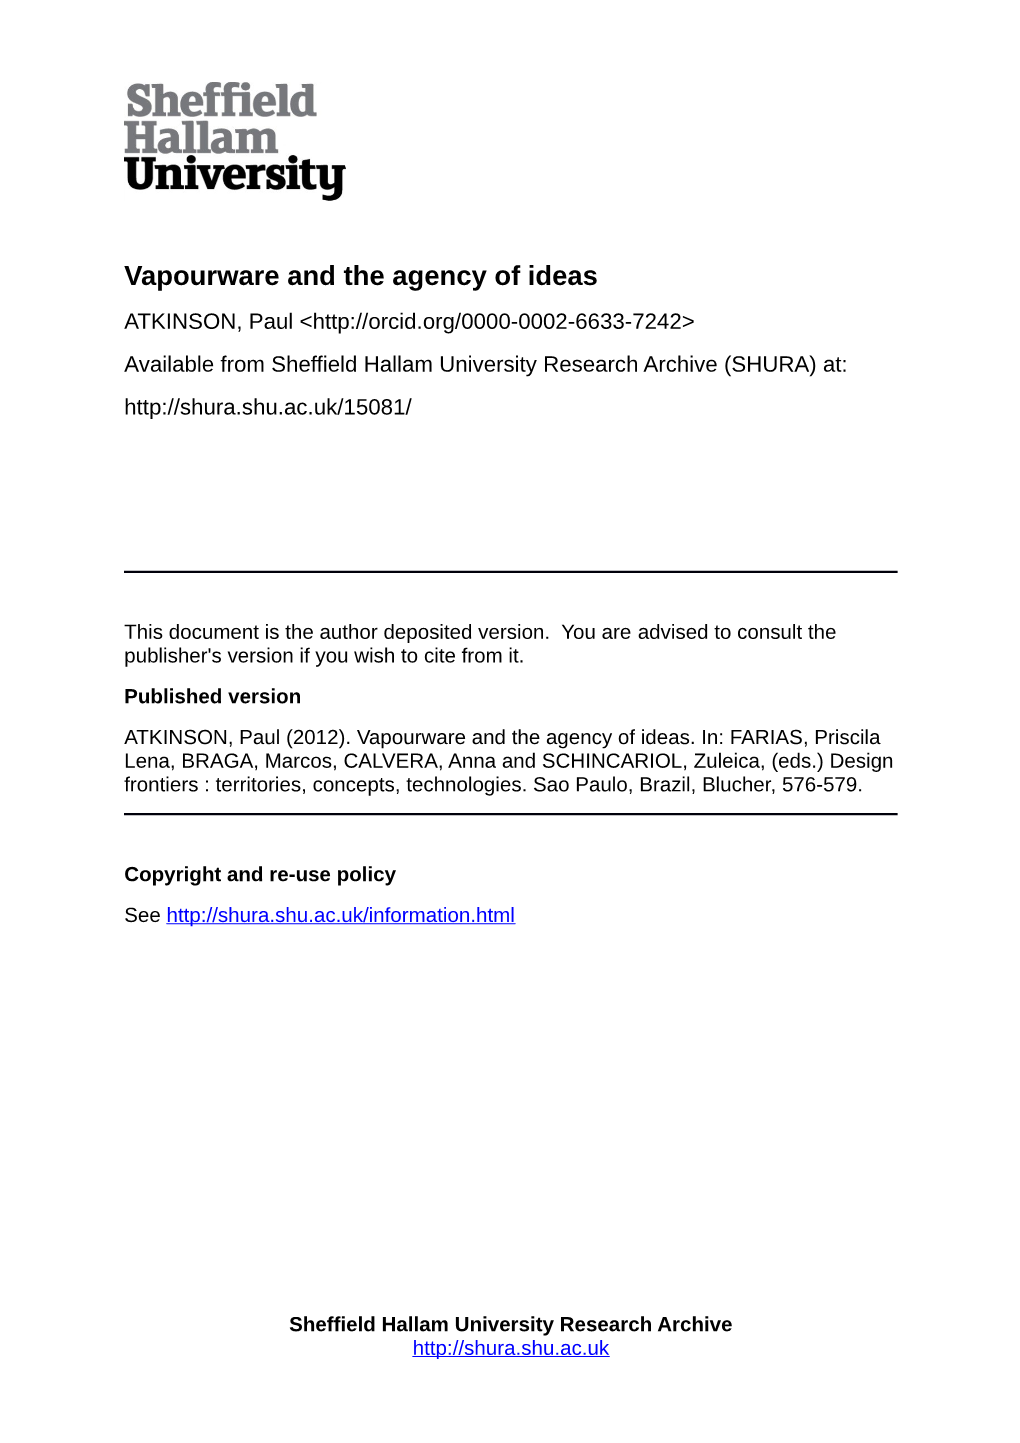 Vapourware and the Agency of Ideas